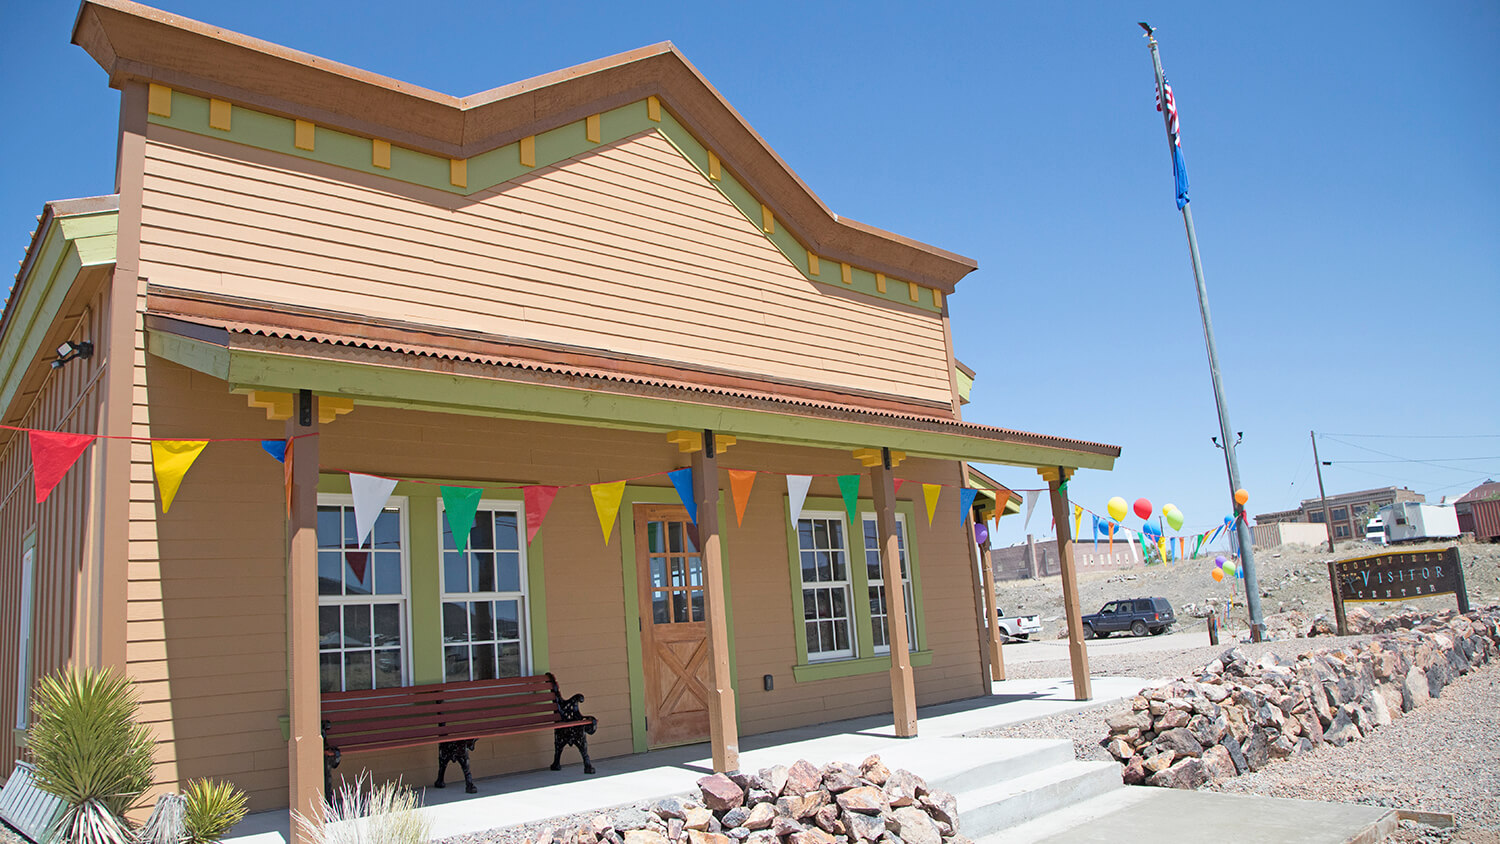 Goldfield Visitor’s Center